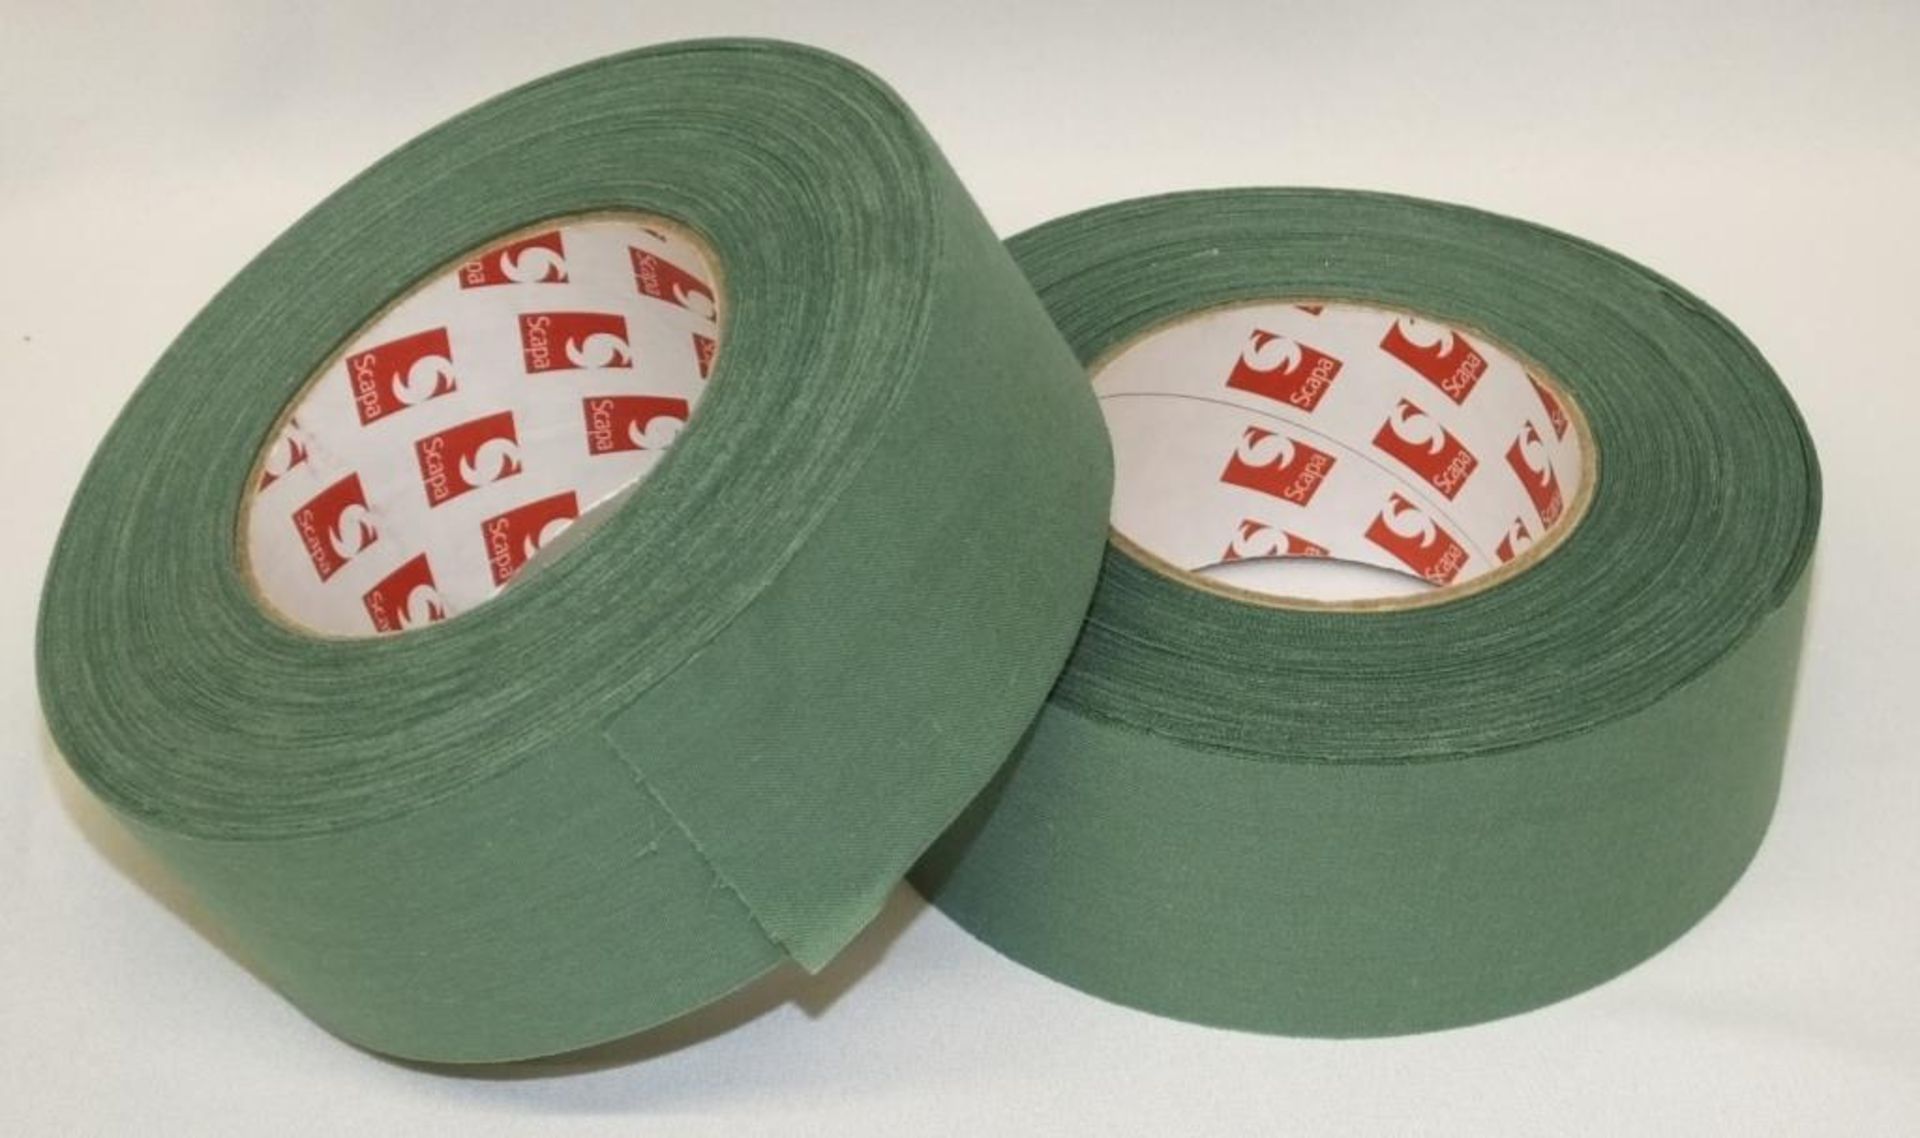 Scapa 3302 Pro Tape - Olive Green - 50mm x 50M rolls - 16 rolls per box - 2 boxes - Image 5 of 5